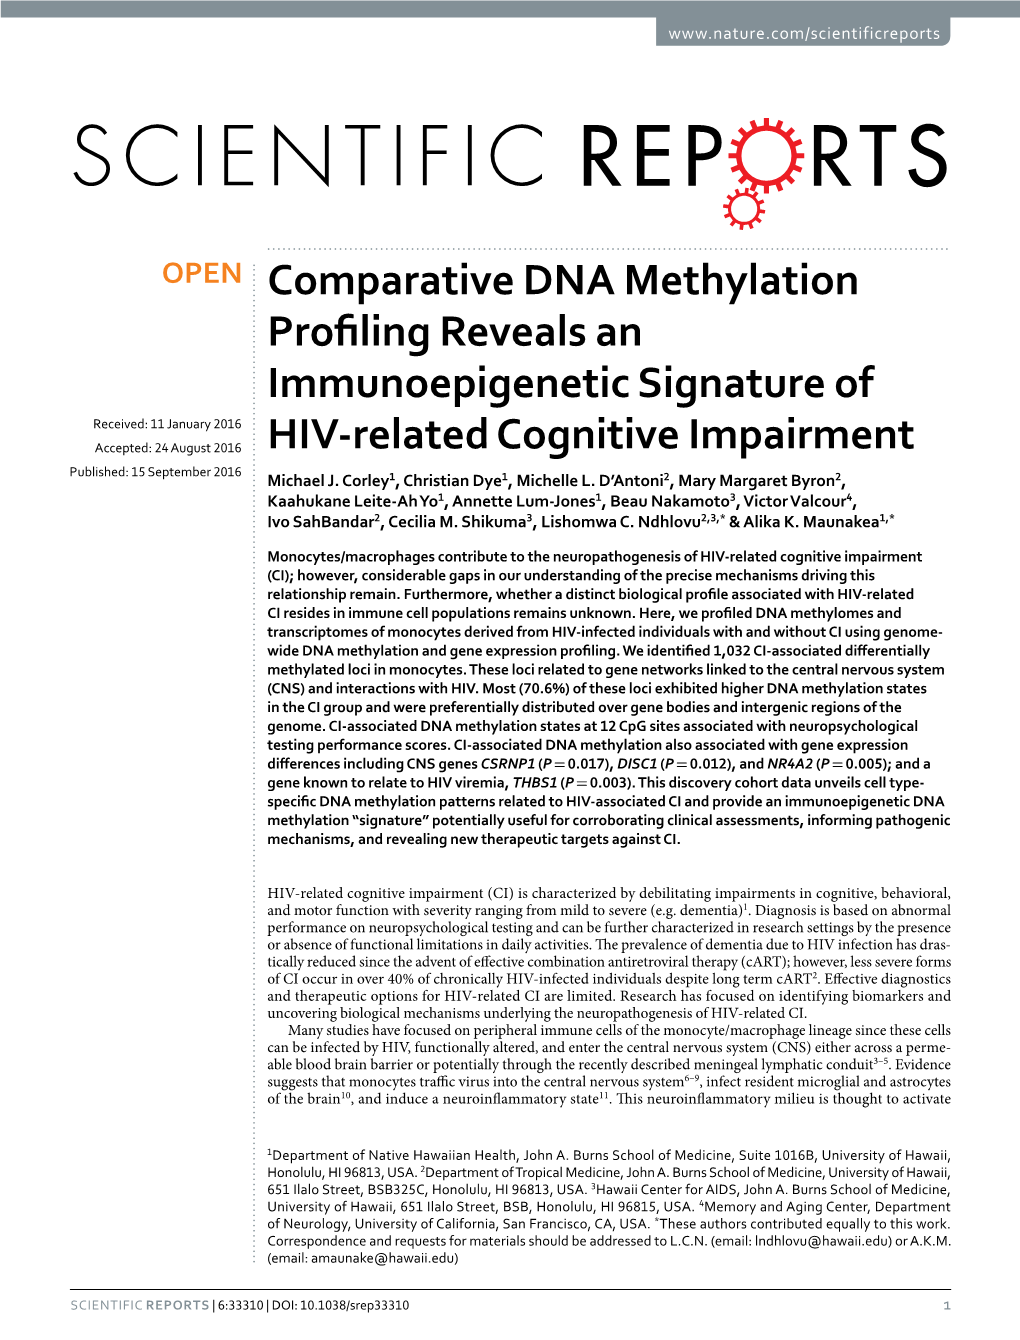 Comparative DNA Methylation Profiling Reveals An